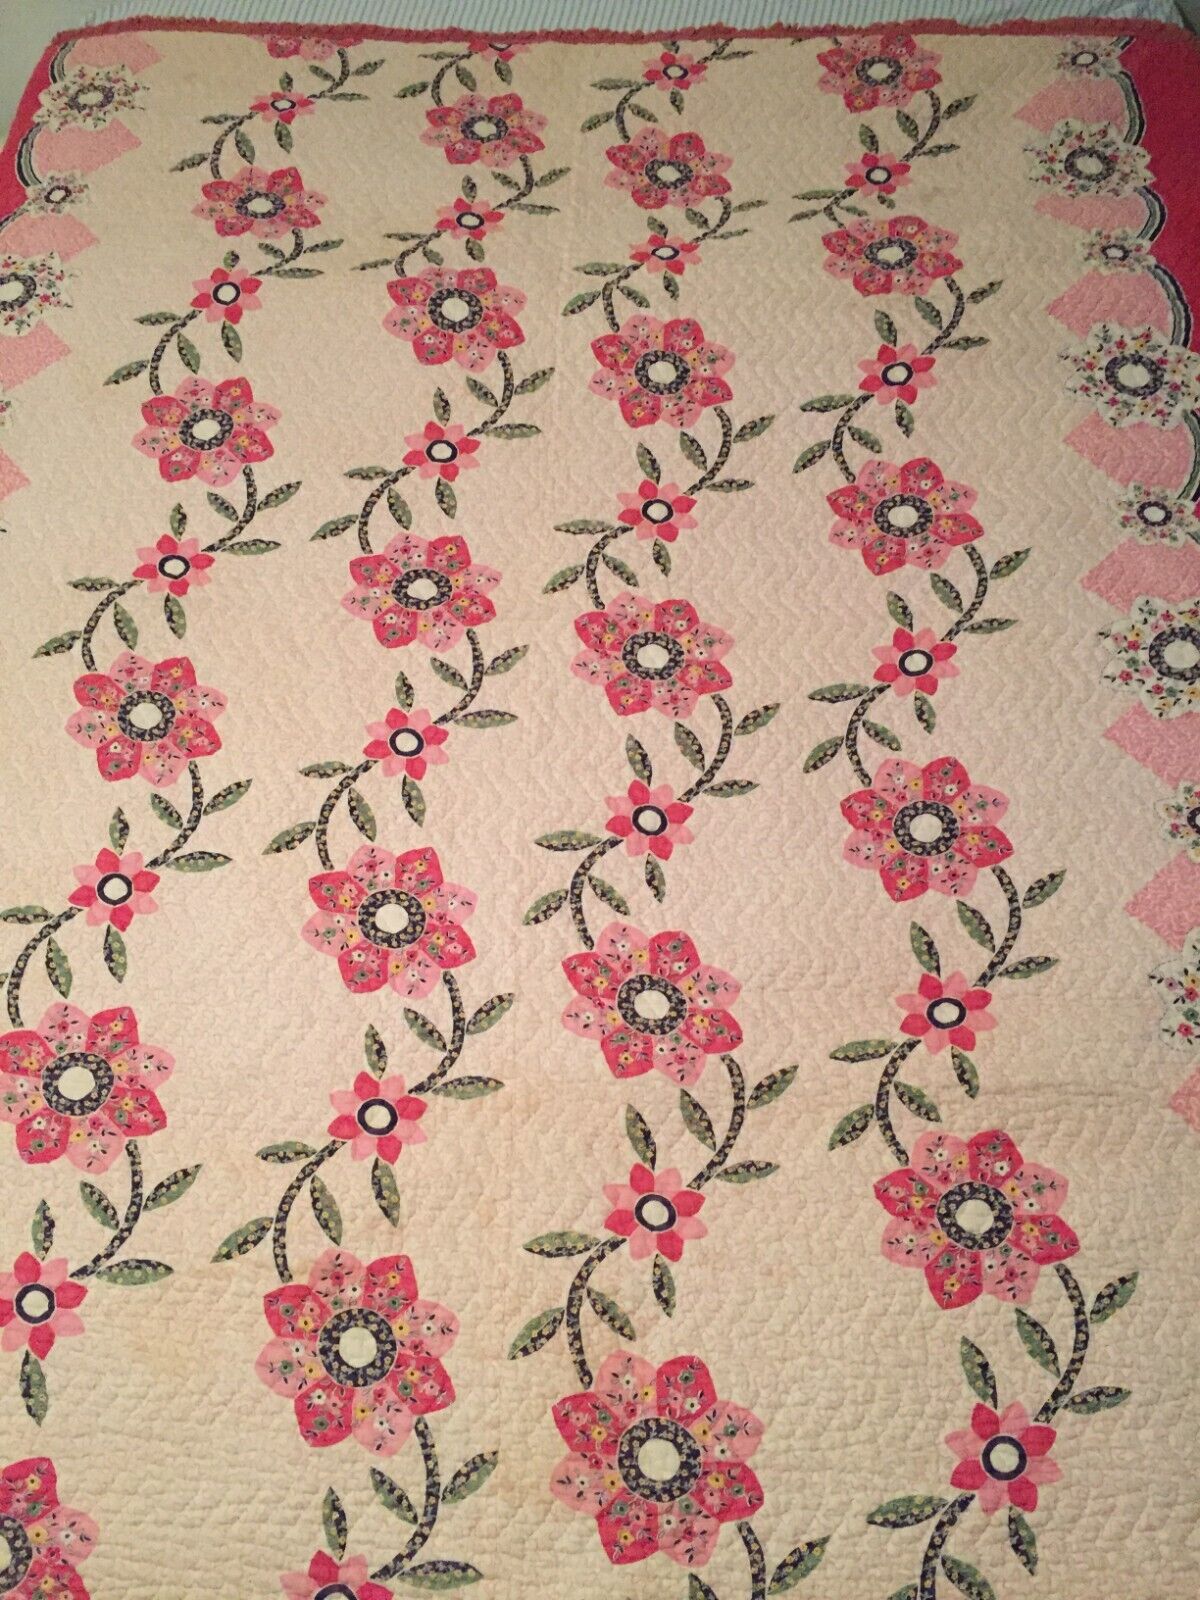 Hand Stitched Zig Zag Stitch Floral Twin/Full Quilt Bedspread Coverlet Homemade